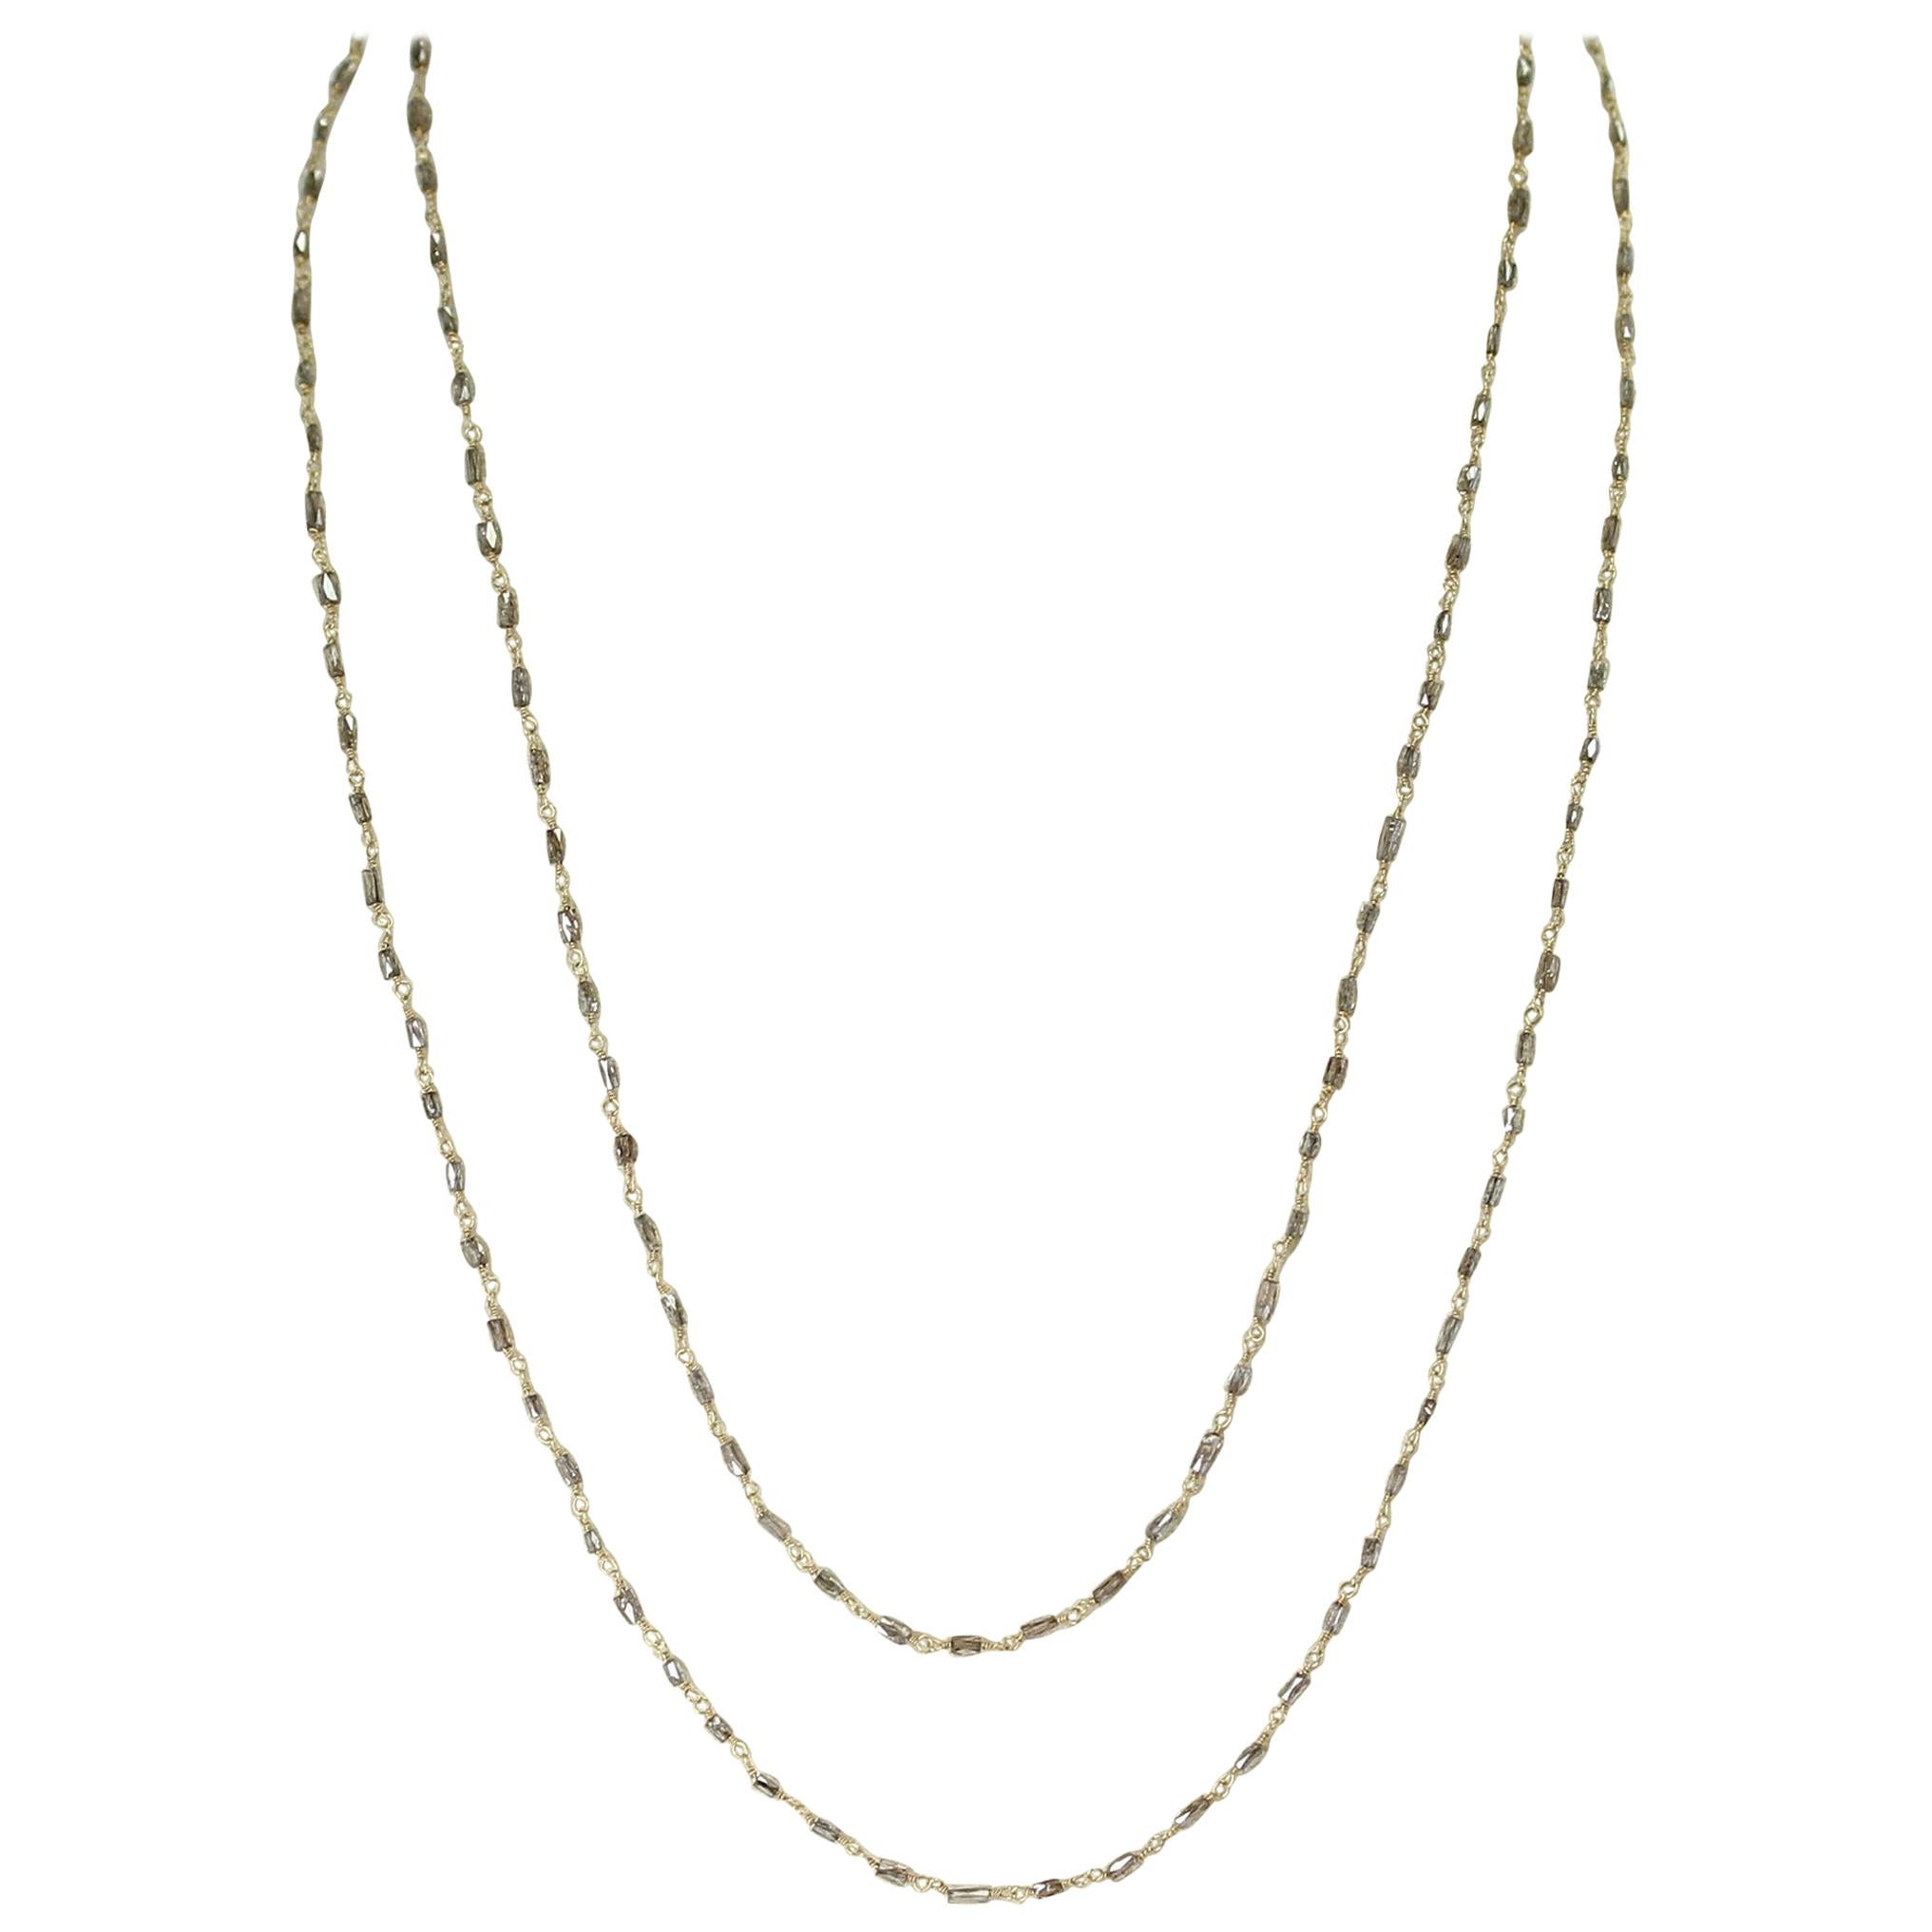 Genuine Champagne Diamond Tube-Shape Beads Wire-Wrapped Necklace, 18K Yellow